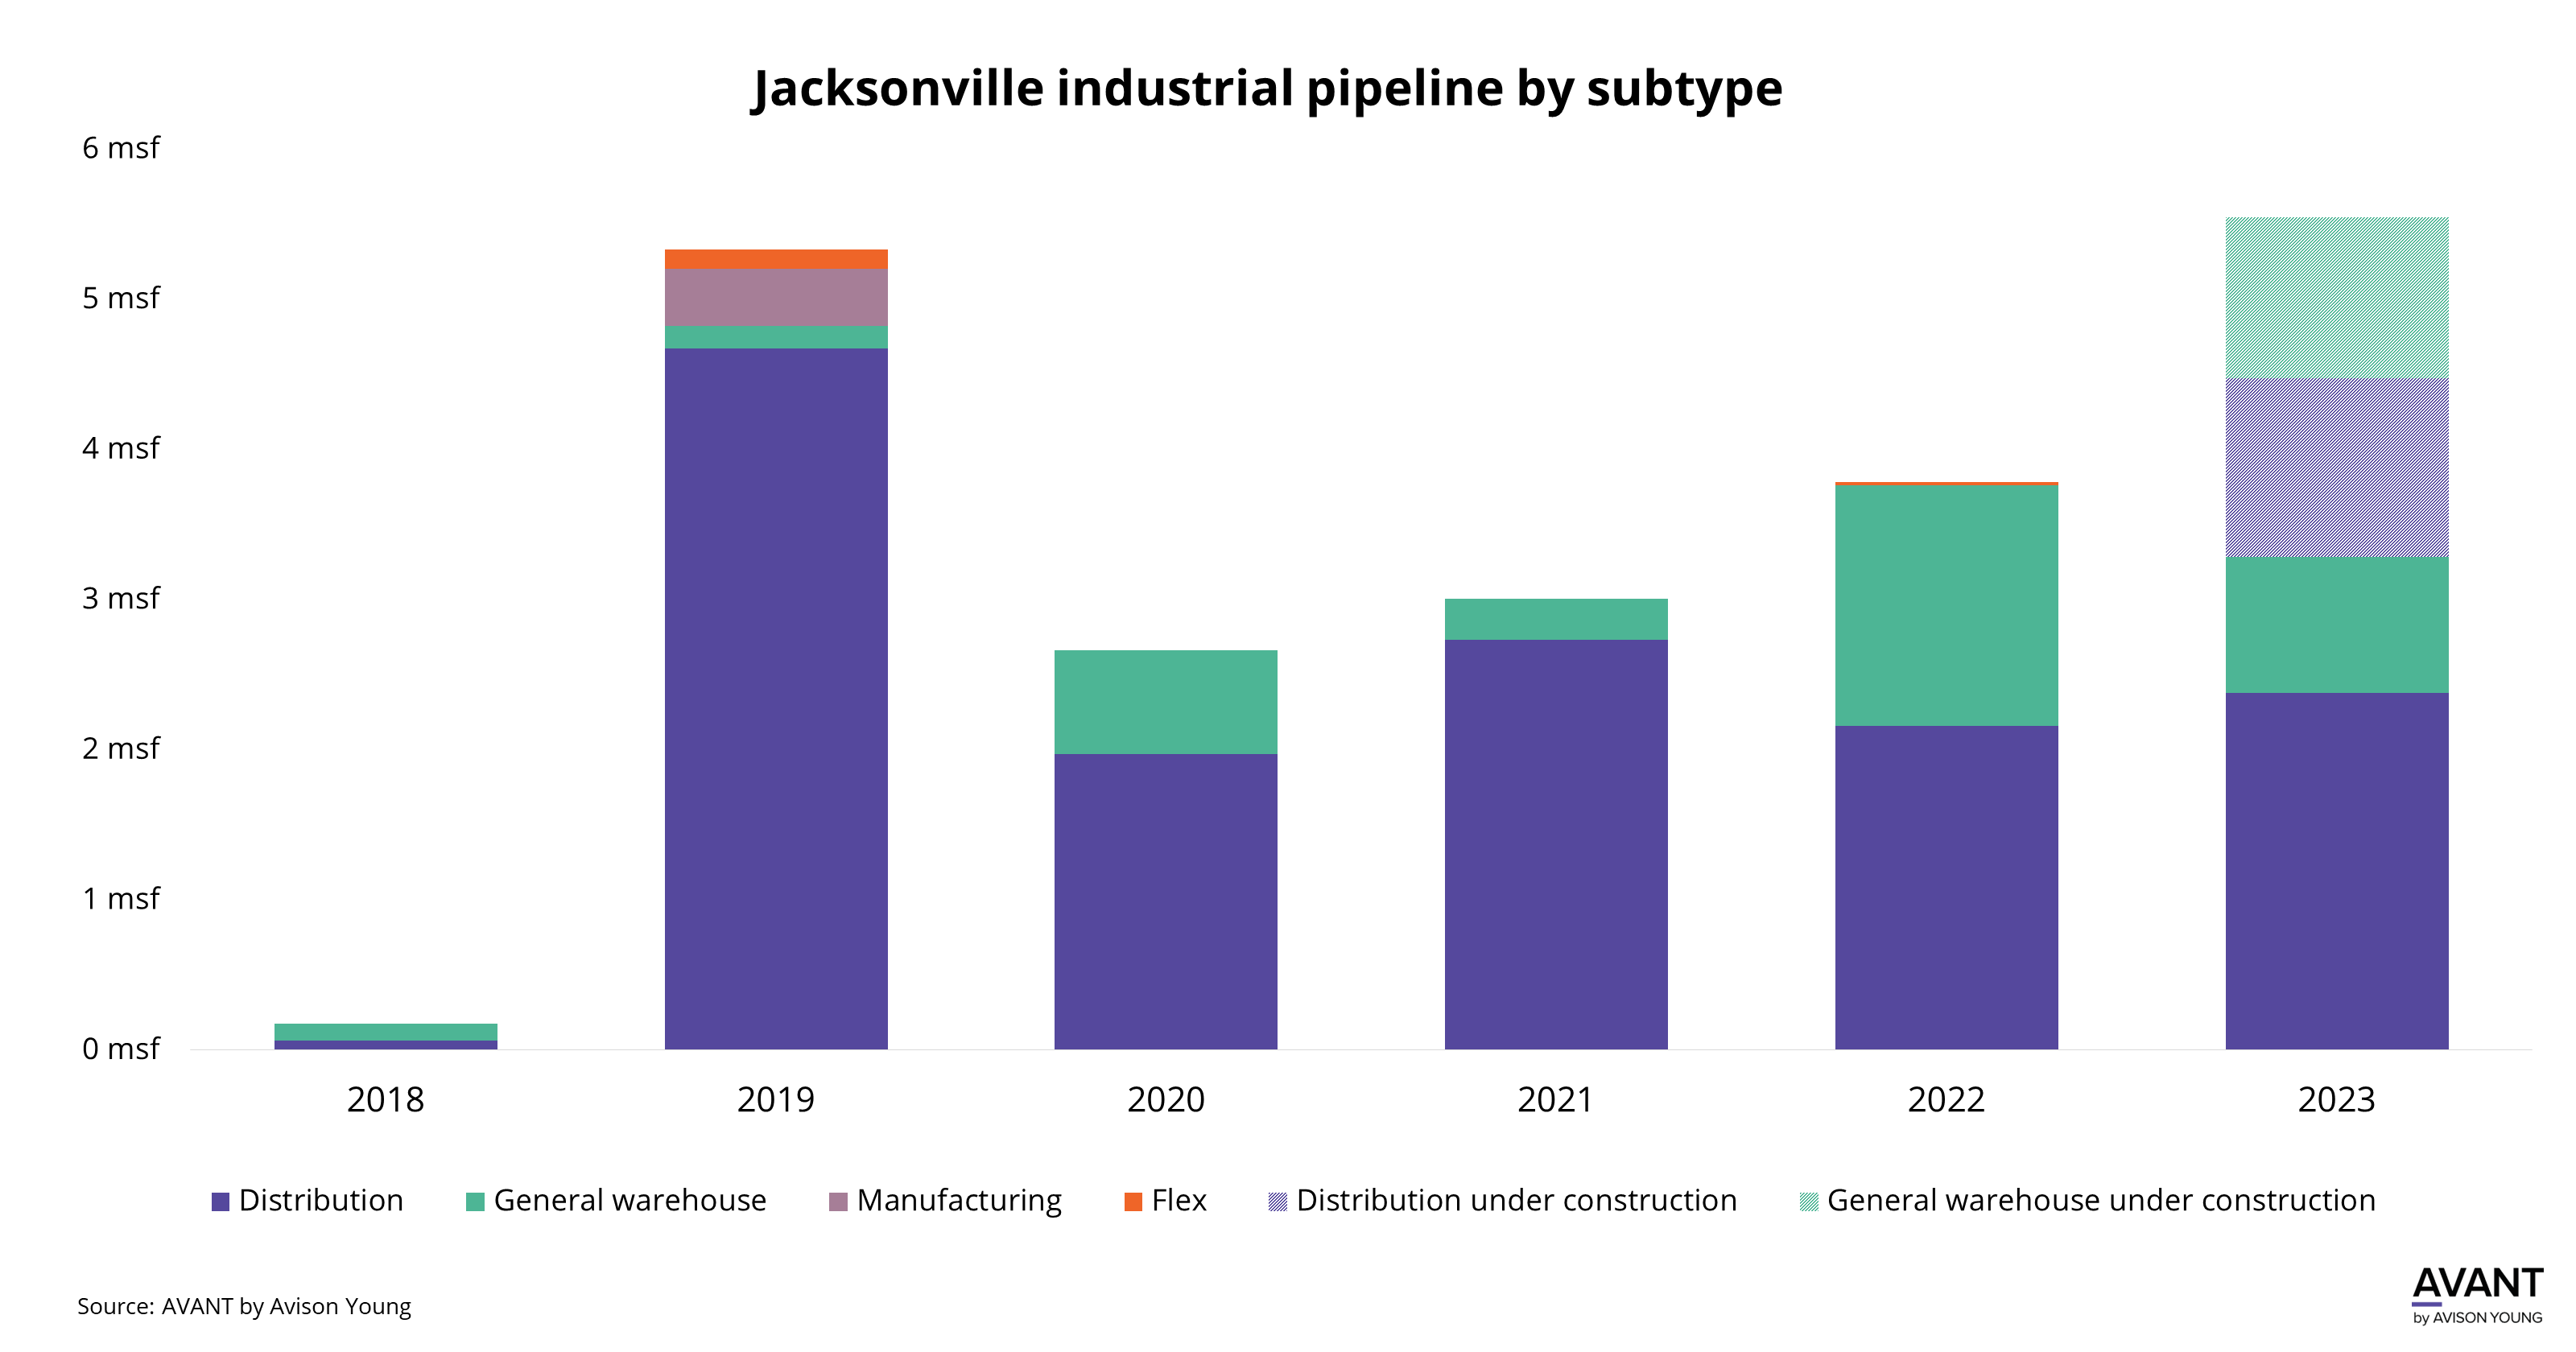 graph of Jacksonville industrial pipeline by subtype from 2018 to 2023